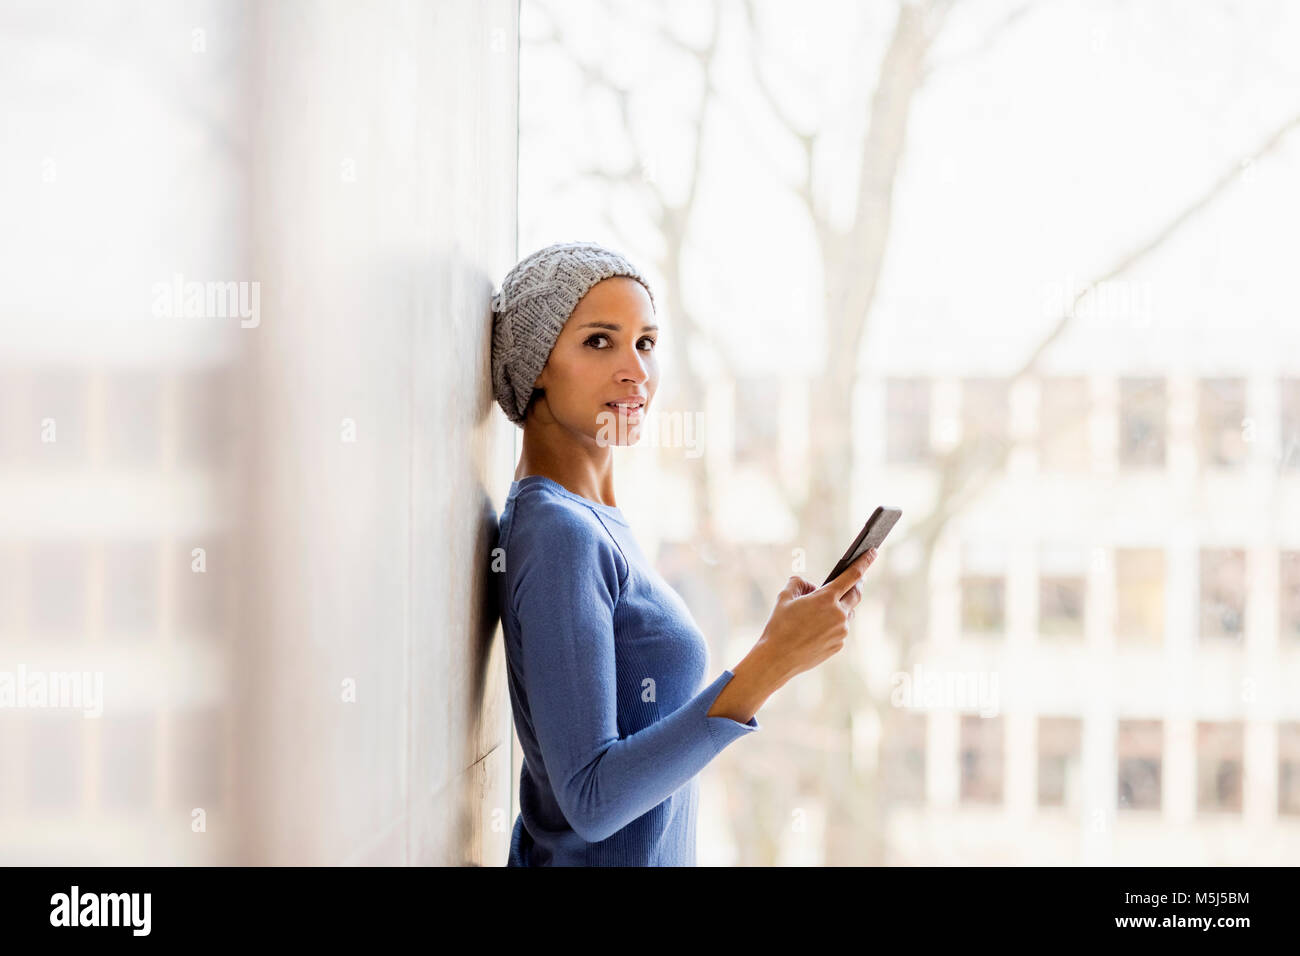 Portrait of young woman with cell phone in front of window Banque D'Images